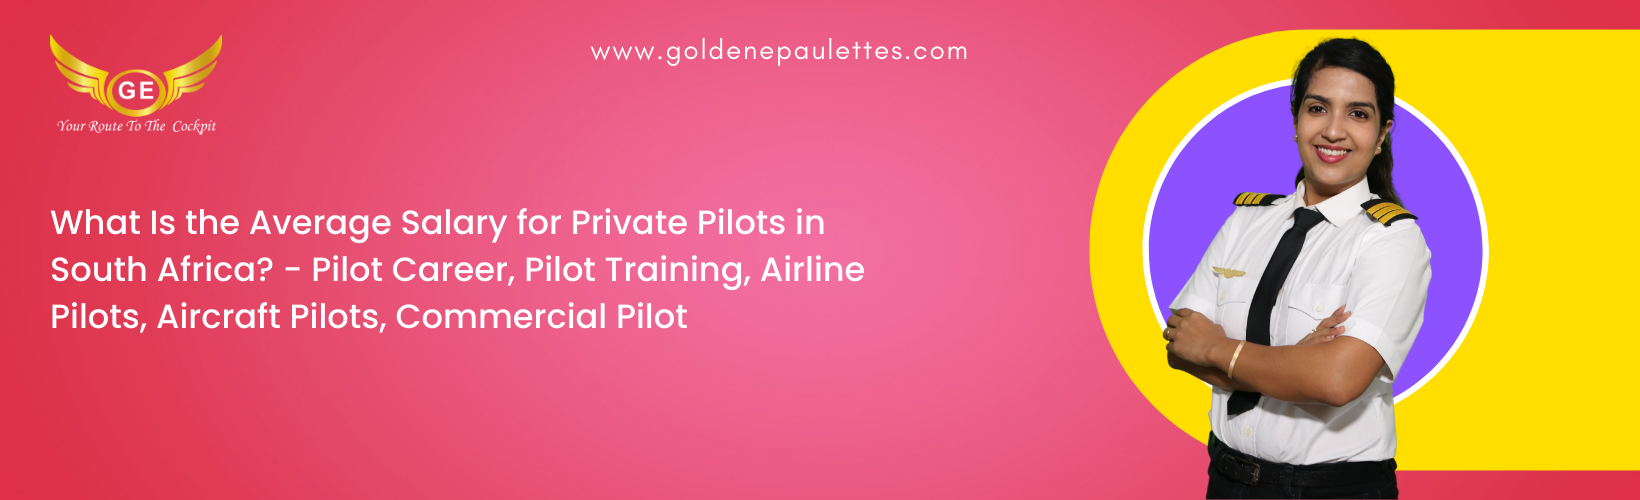 What Is the Average Salary for Private Pilots in South Africa